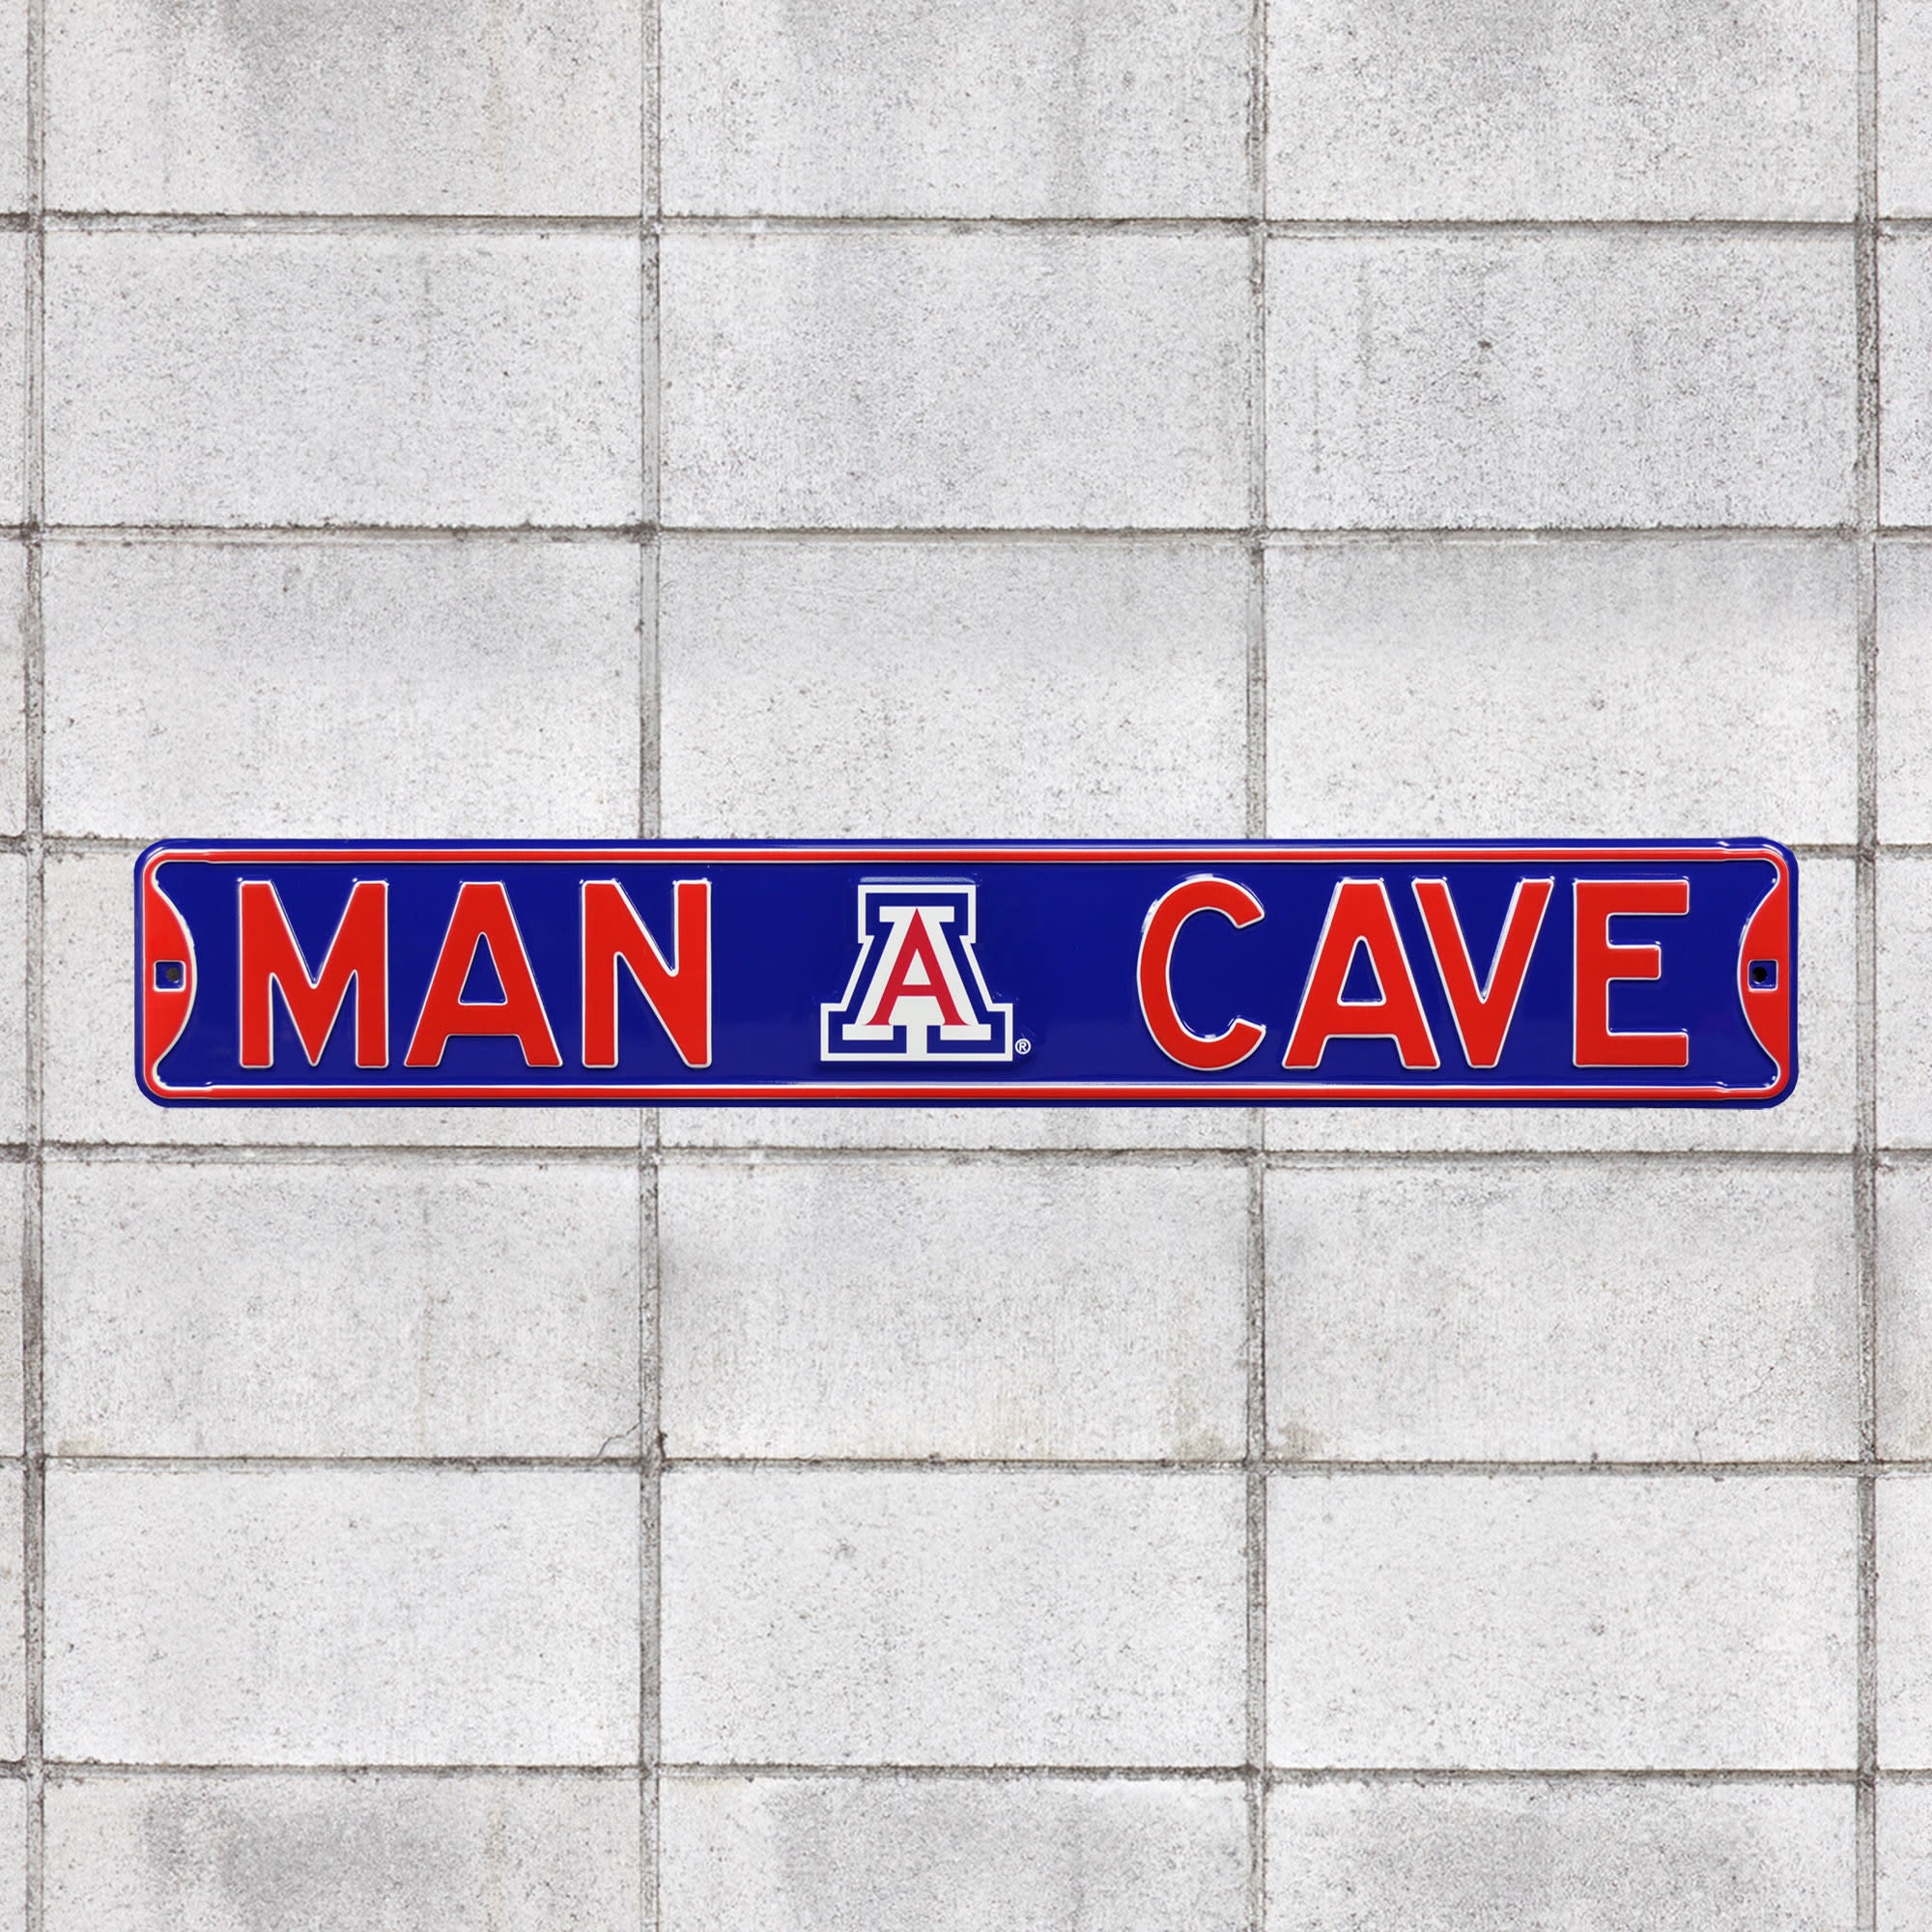 Arizona Wildcats: Man Cave - Officially Licensed Metal Street Sign 36.0"W x 6.0"H by Fathead | 100% Steel